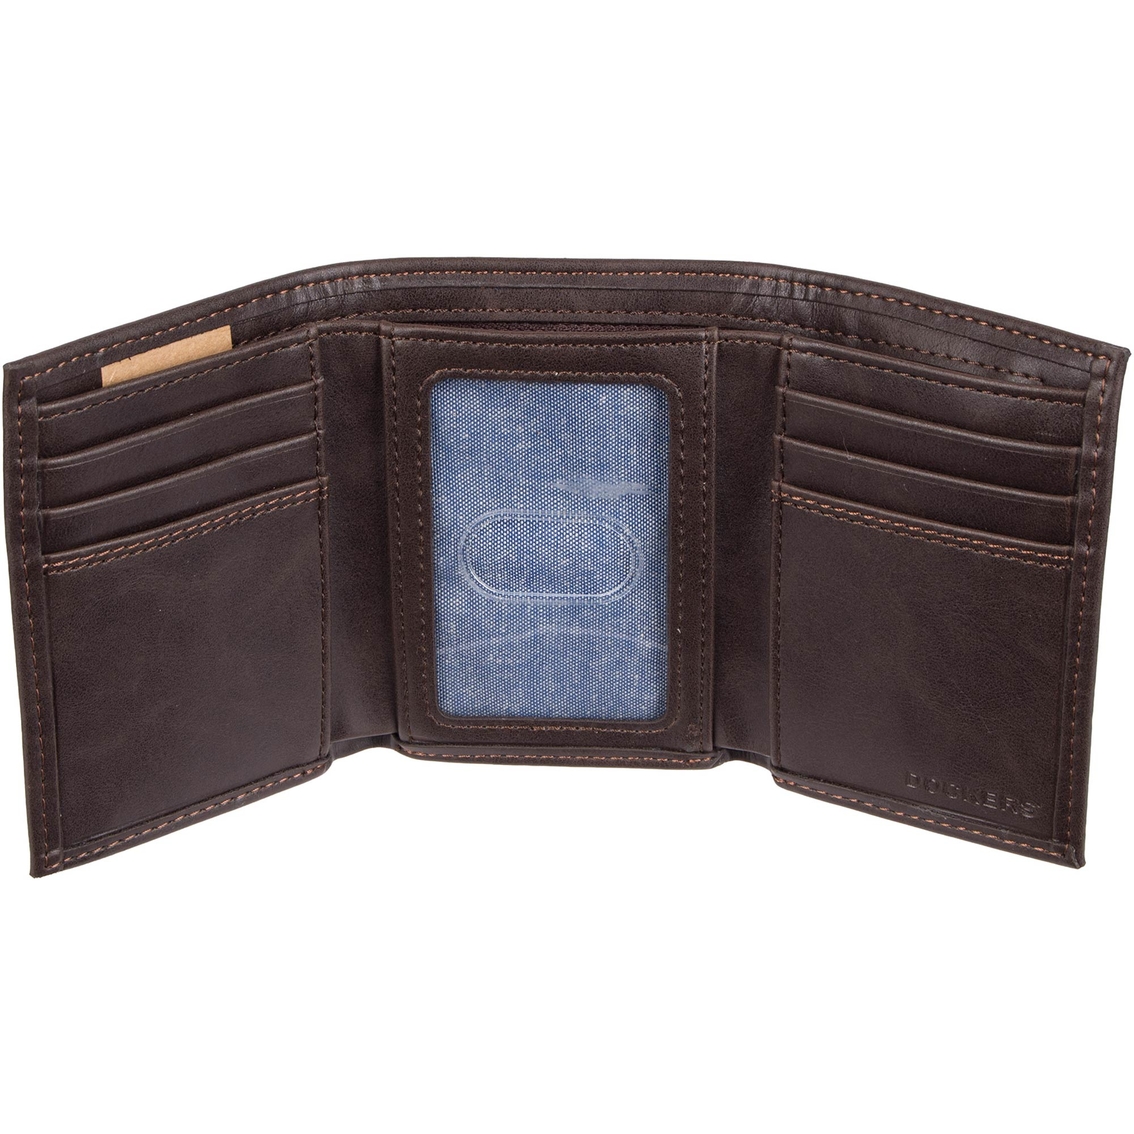 Dockers RFID Blocking Trifold Wallet with Zipper Pocket - Image 4 of 4